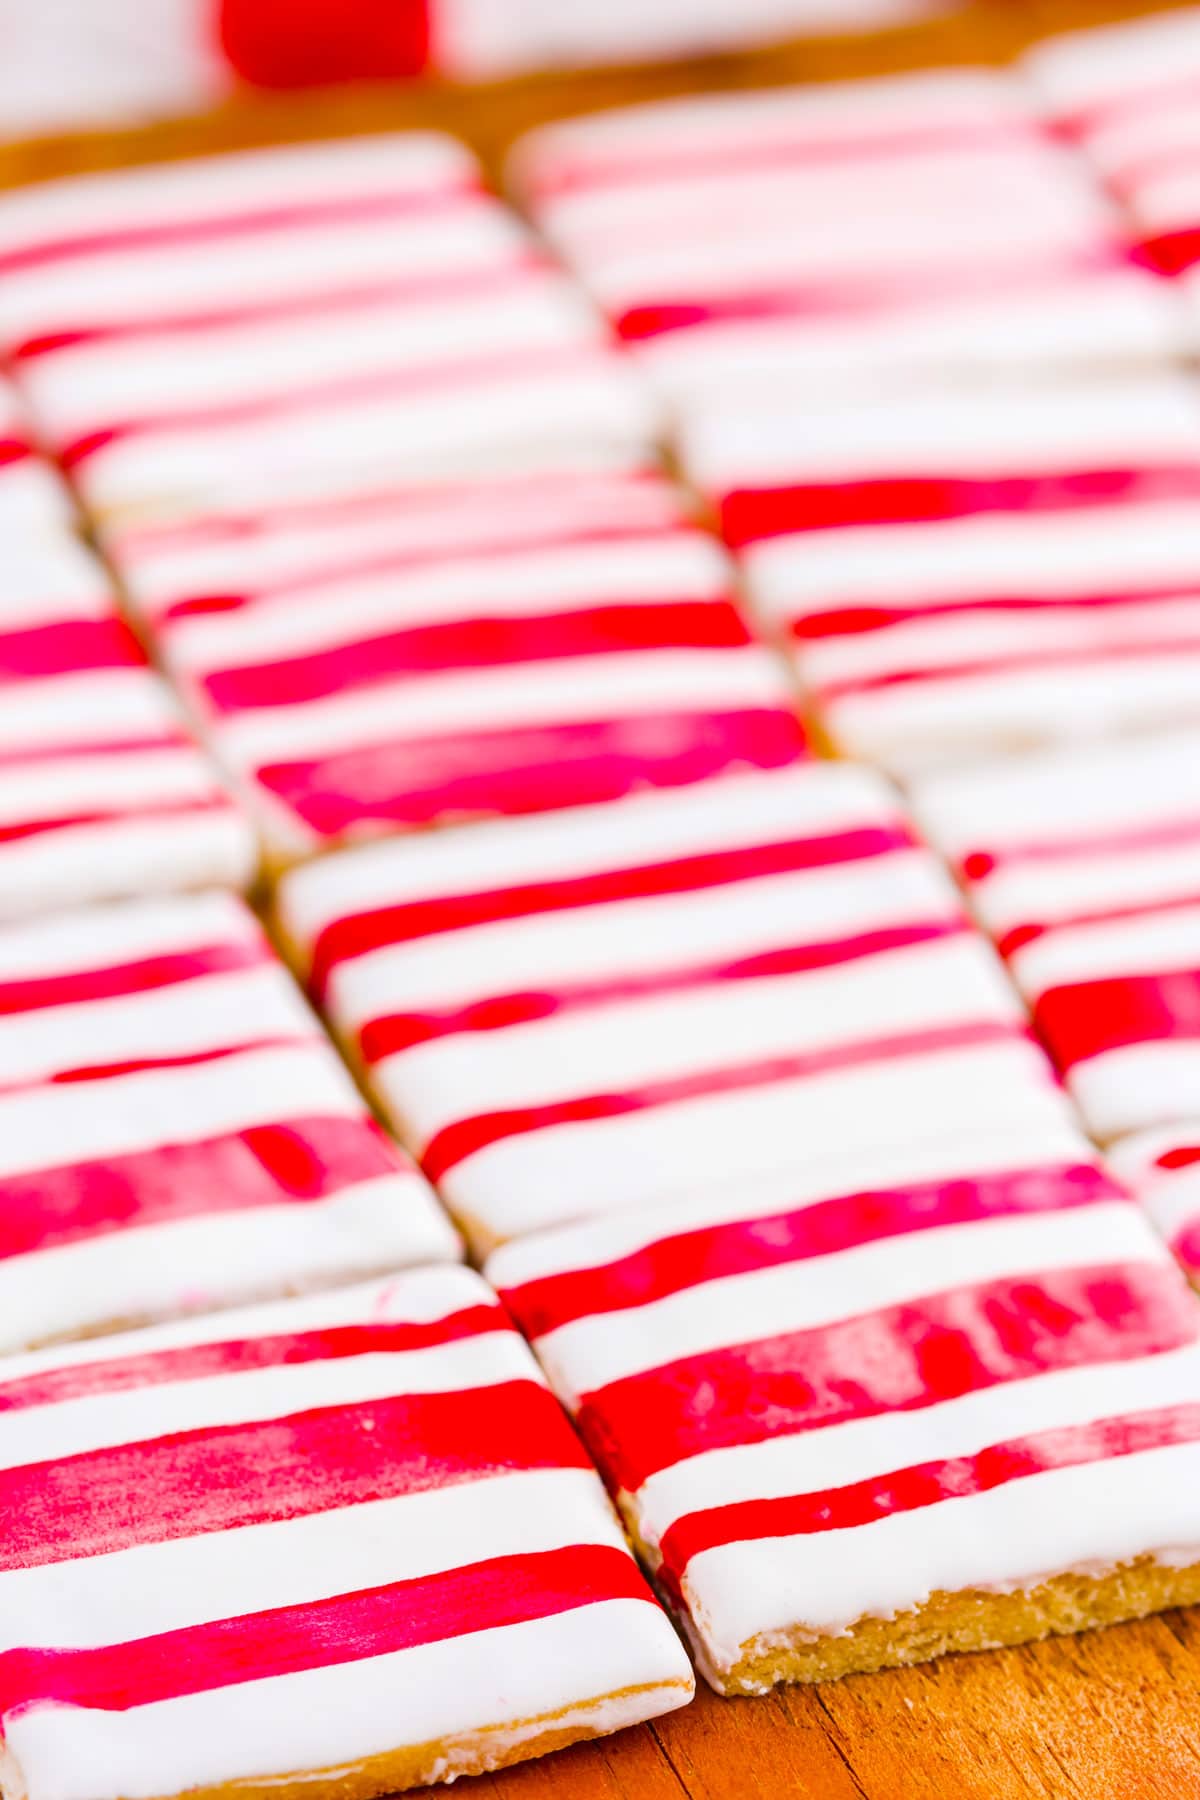 A plate of red-striped cookies